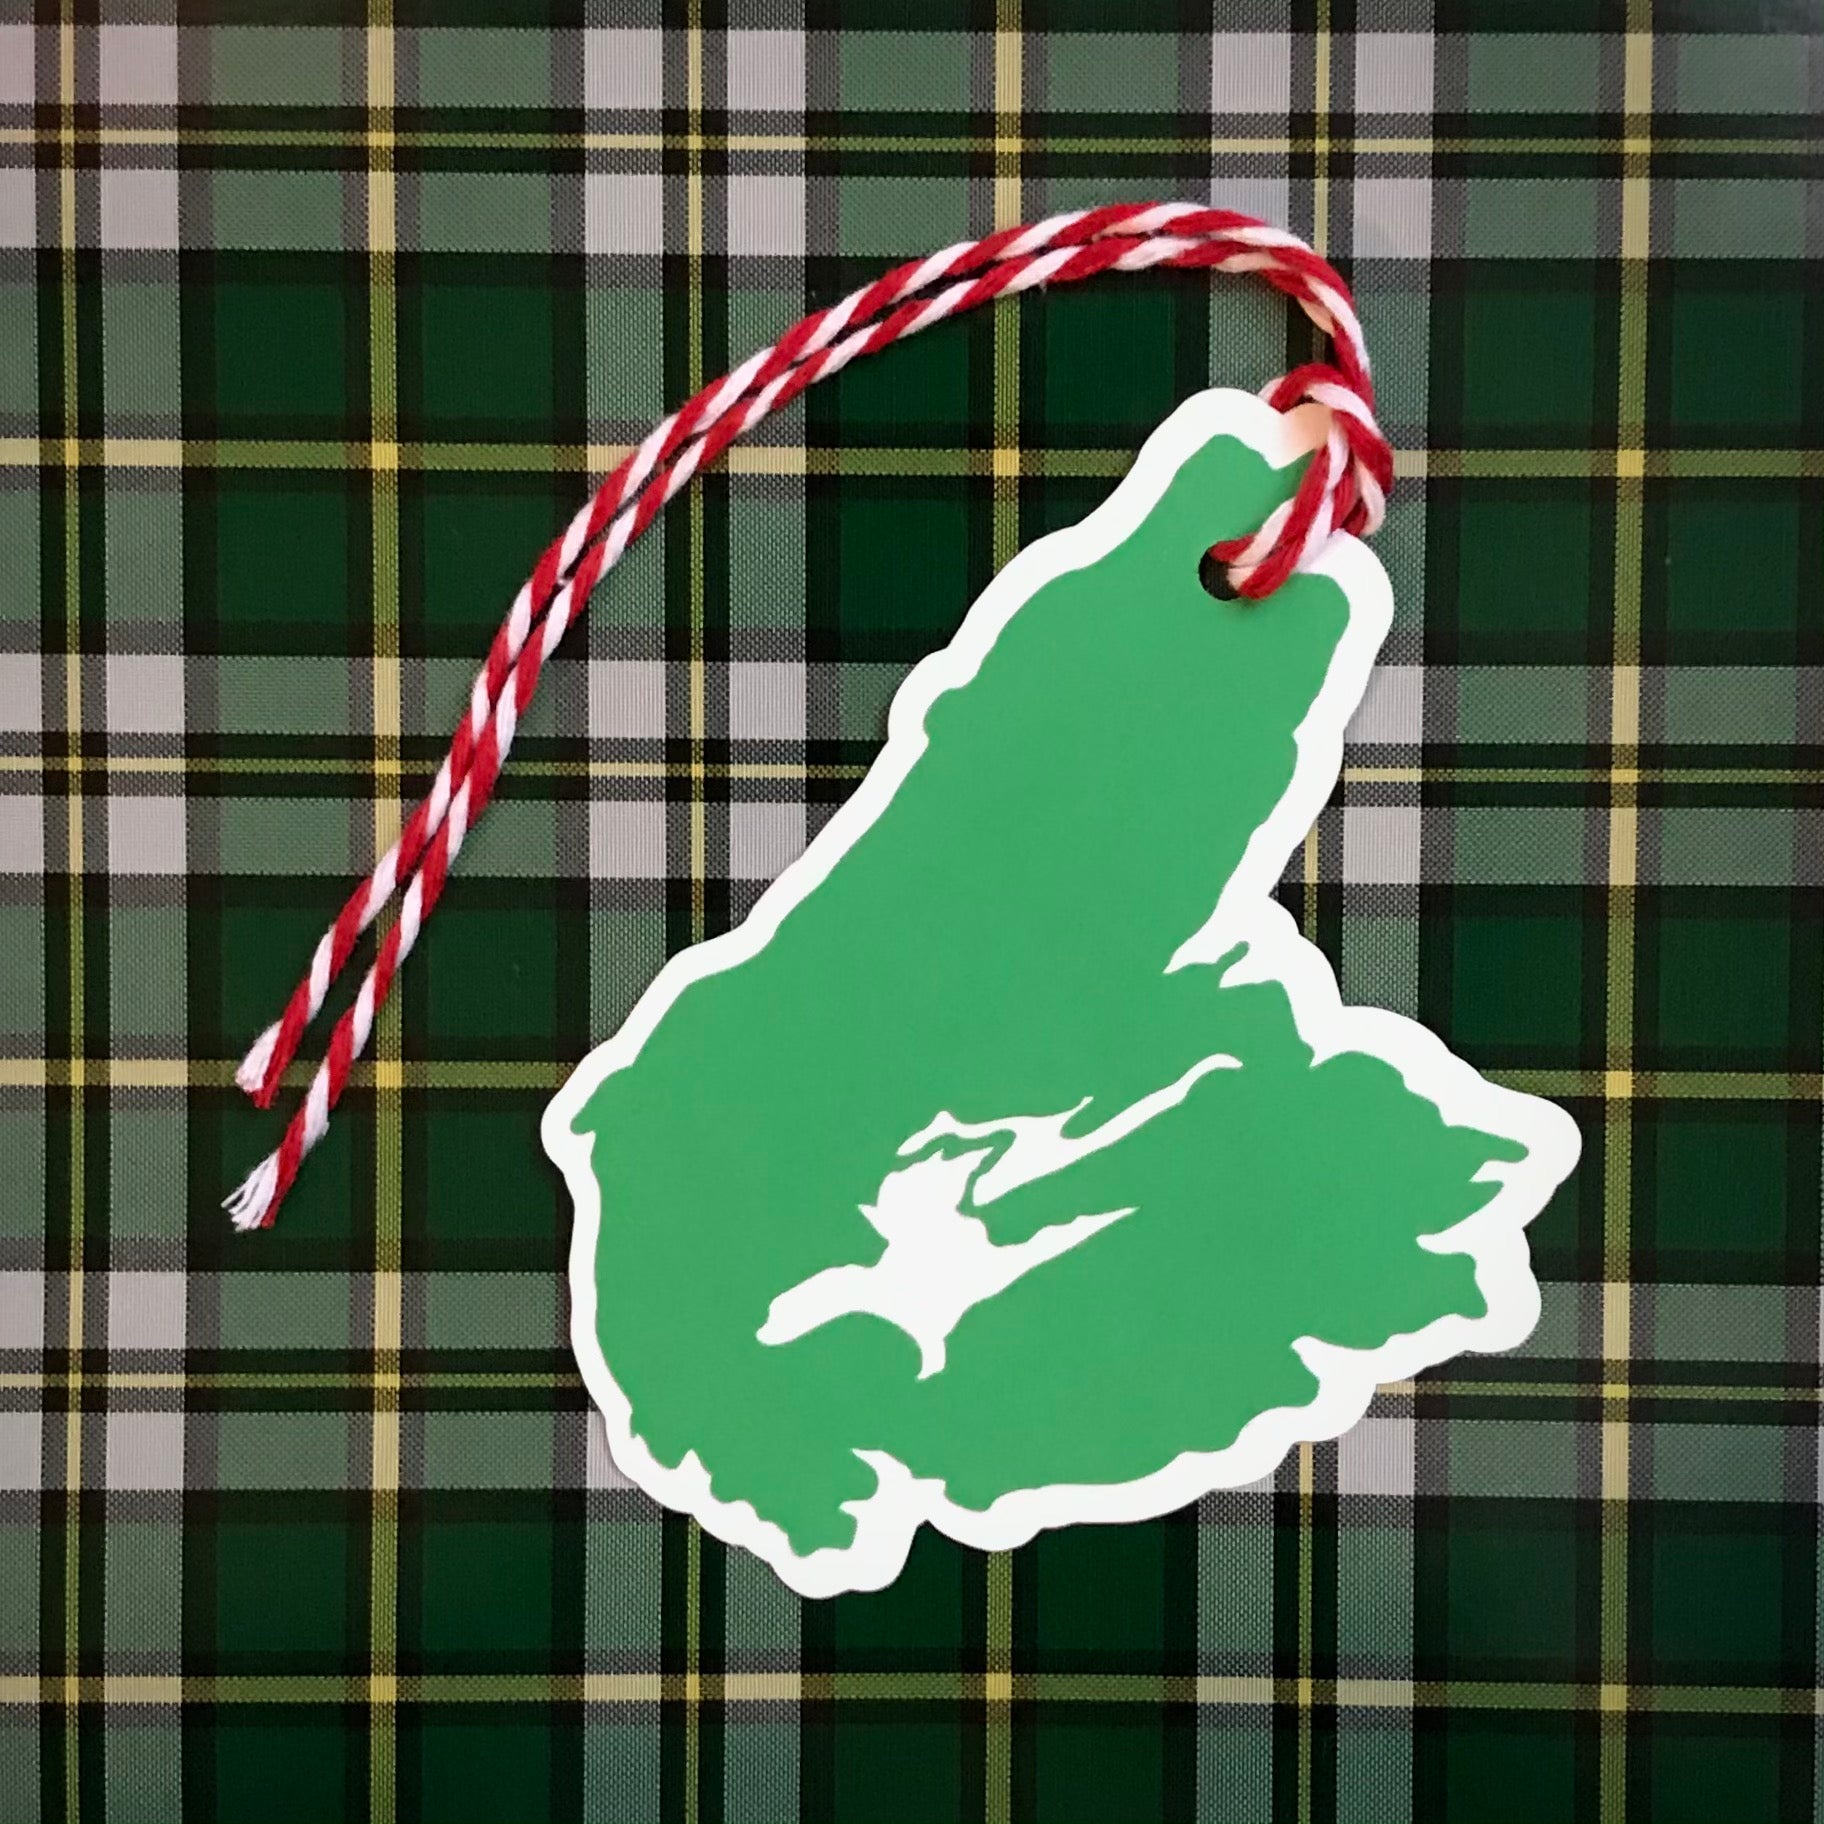 a paper gift tag in the shape of cape breton island is shown against a background of the official Cape Breton Island Tartan.